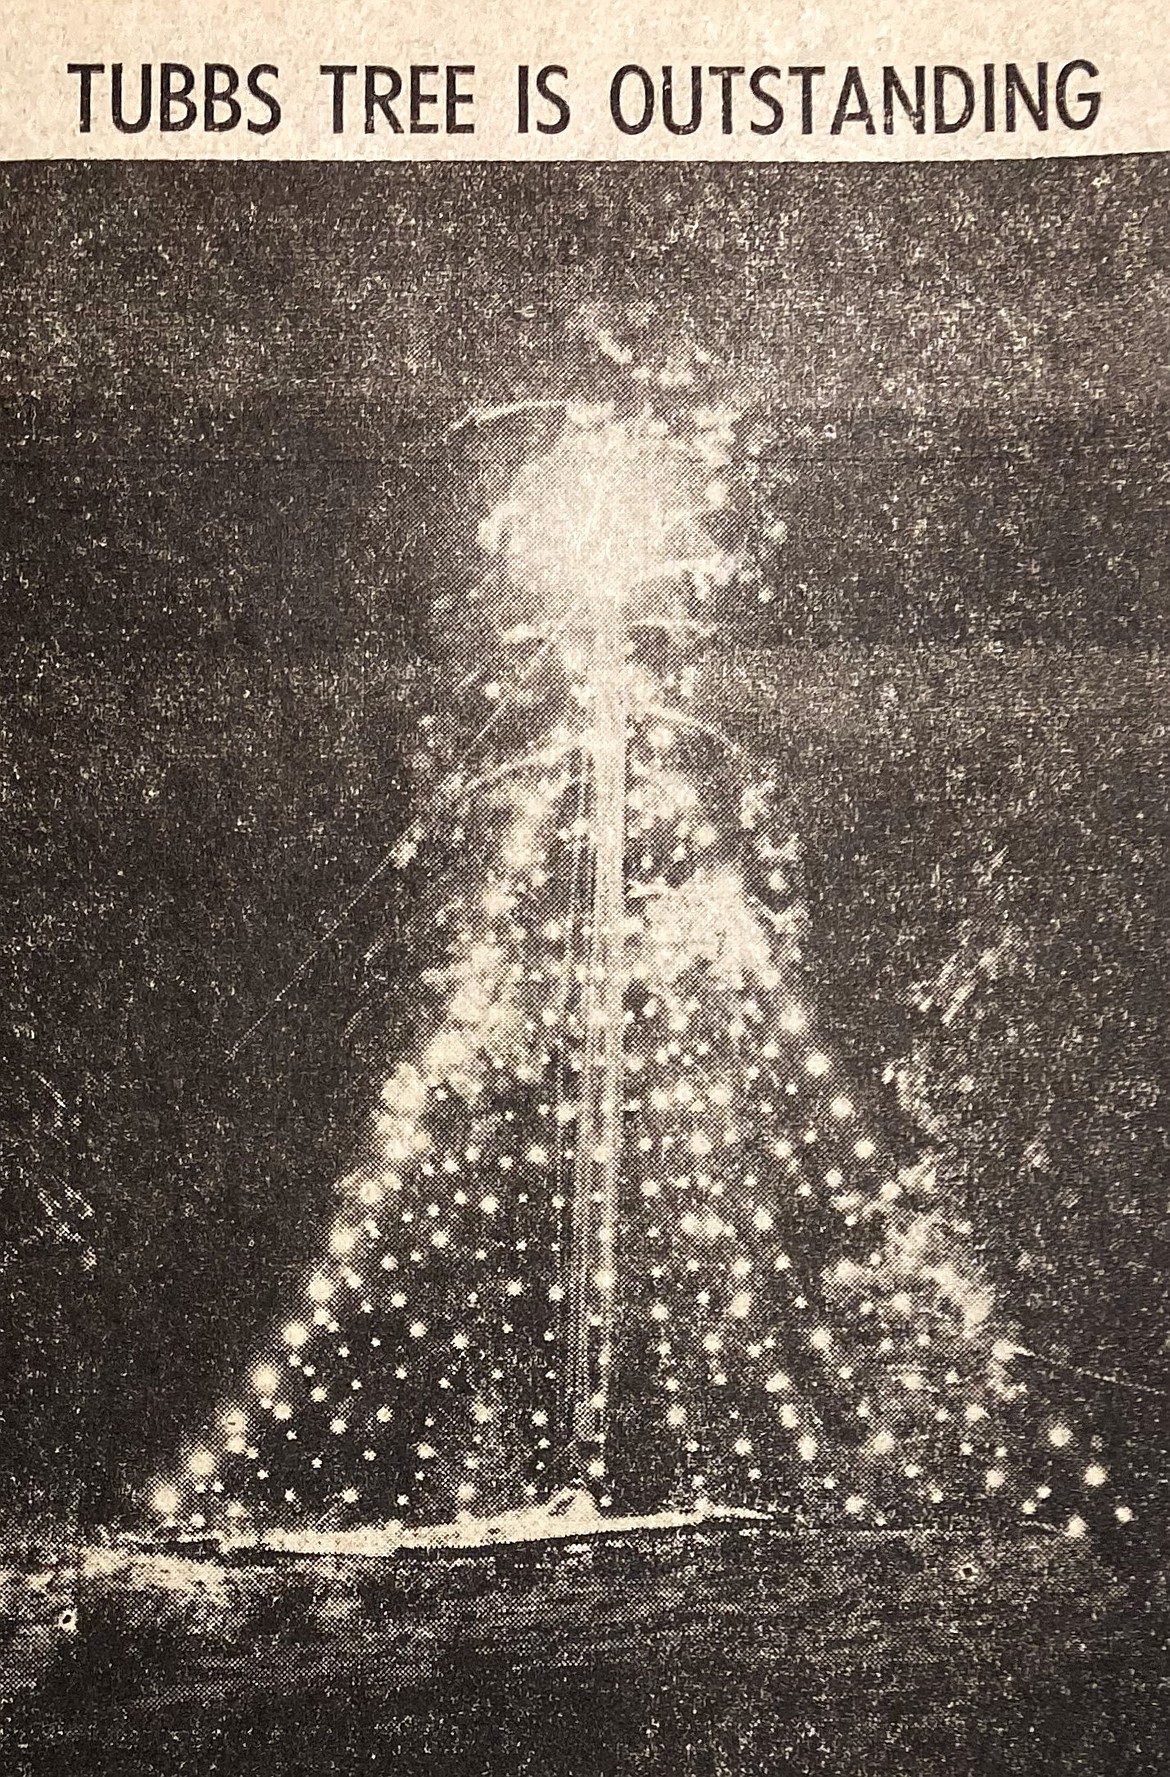 The 1958 lighted yellow pine on Tubbs Hill could be seen for miles.